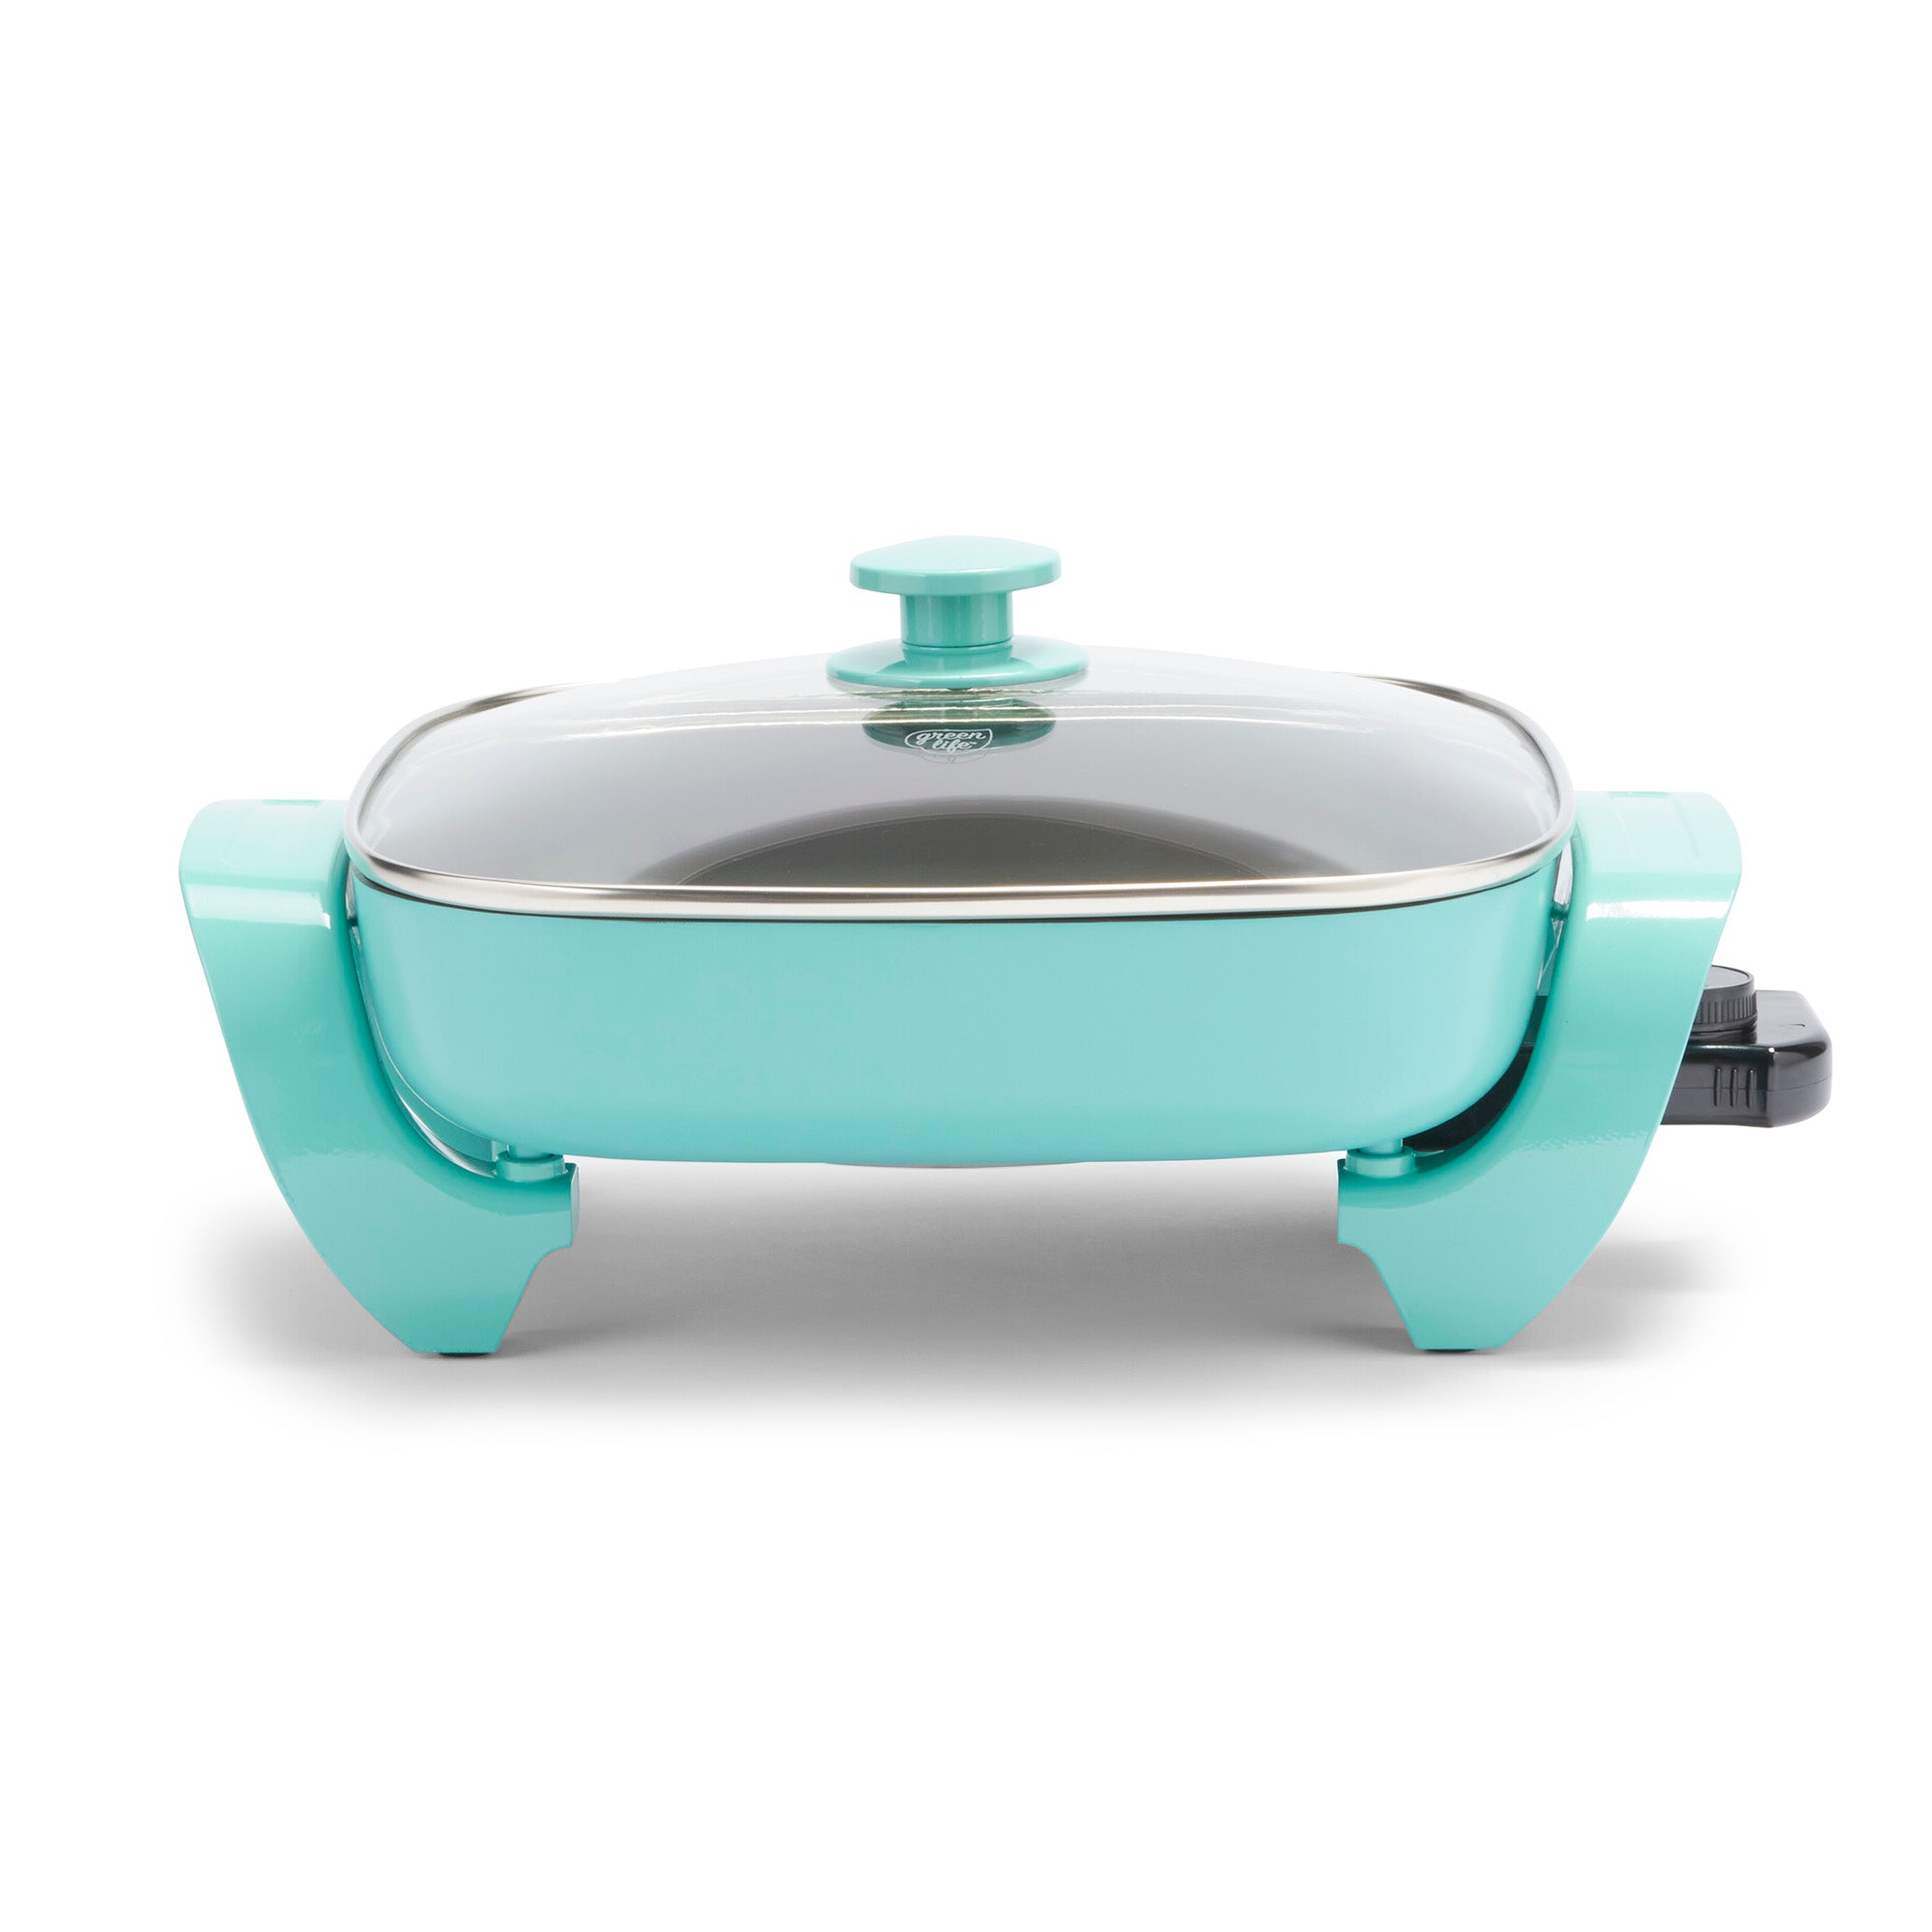 GreenLife Nonstick Square Electric Skillet with Glass Lid - Teal - 12 in